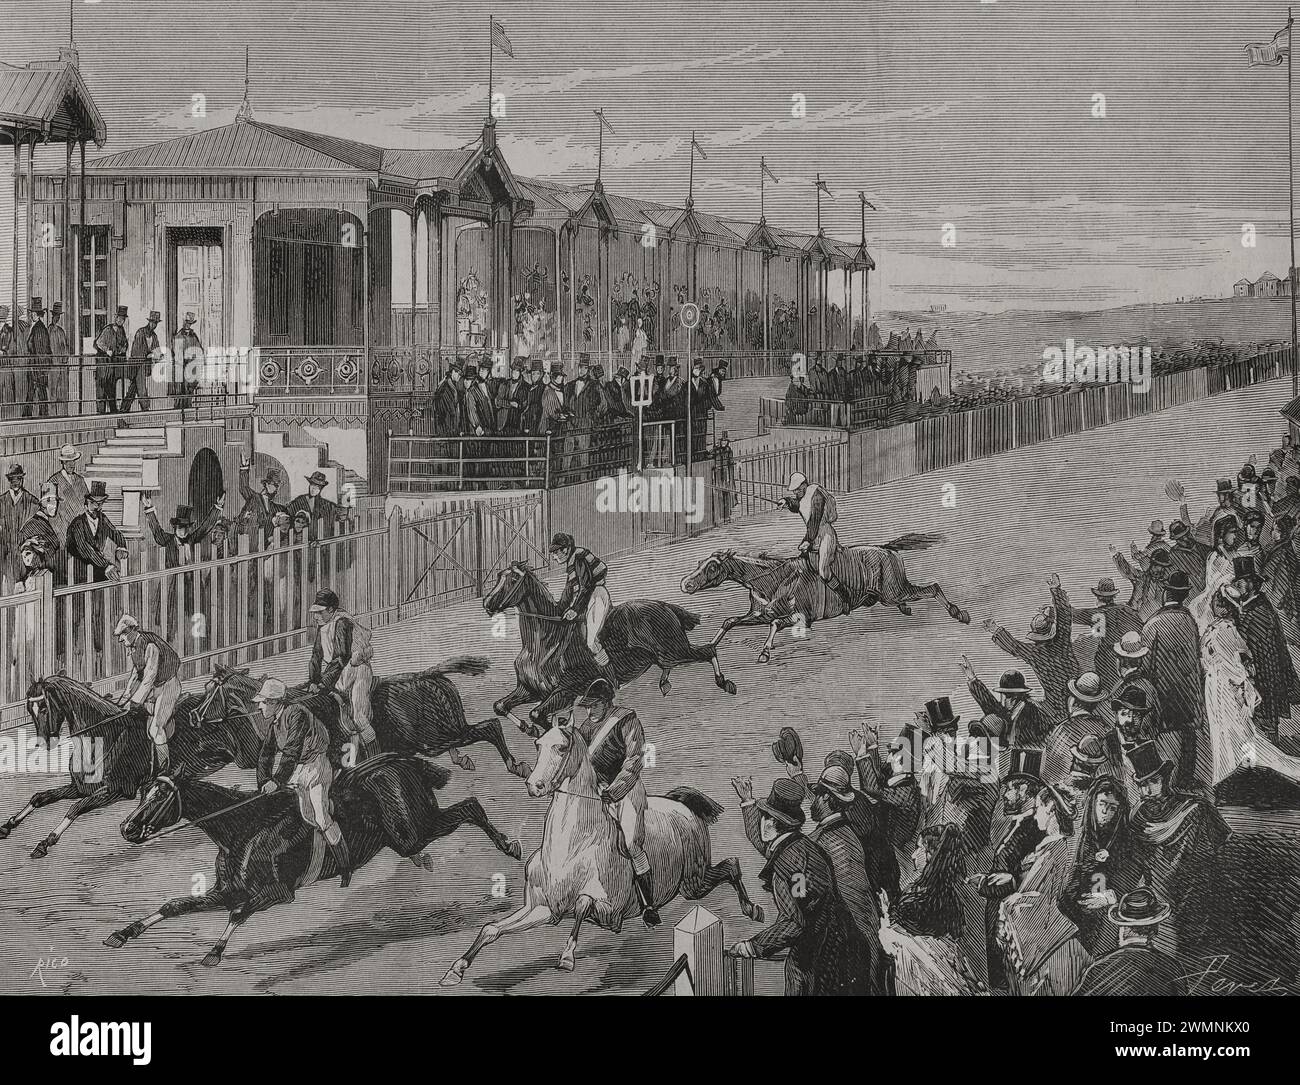 History of Spain. Madrid. Horse racing at the Hipódromo de la Castellana (La Castellana Racecourse). It was inaugurated on 31 January 1878 on the occasion of the wedding of King Alfonso XII and Mercedes of Orléans. Race of the 12th November 1878, in which the horse 'Trovador', owned by Mr. Davies, won the prize of the City Council. Engraving by Rico. La Ilustración Española y Americana (The Spanish and American Illustration), 1878. Stock Photo